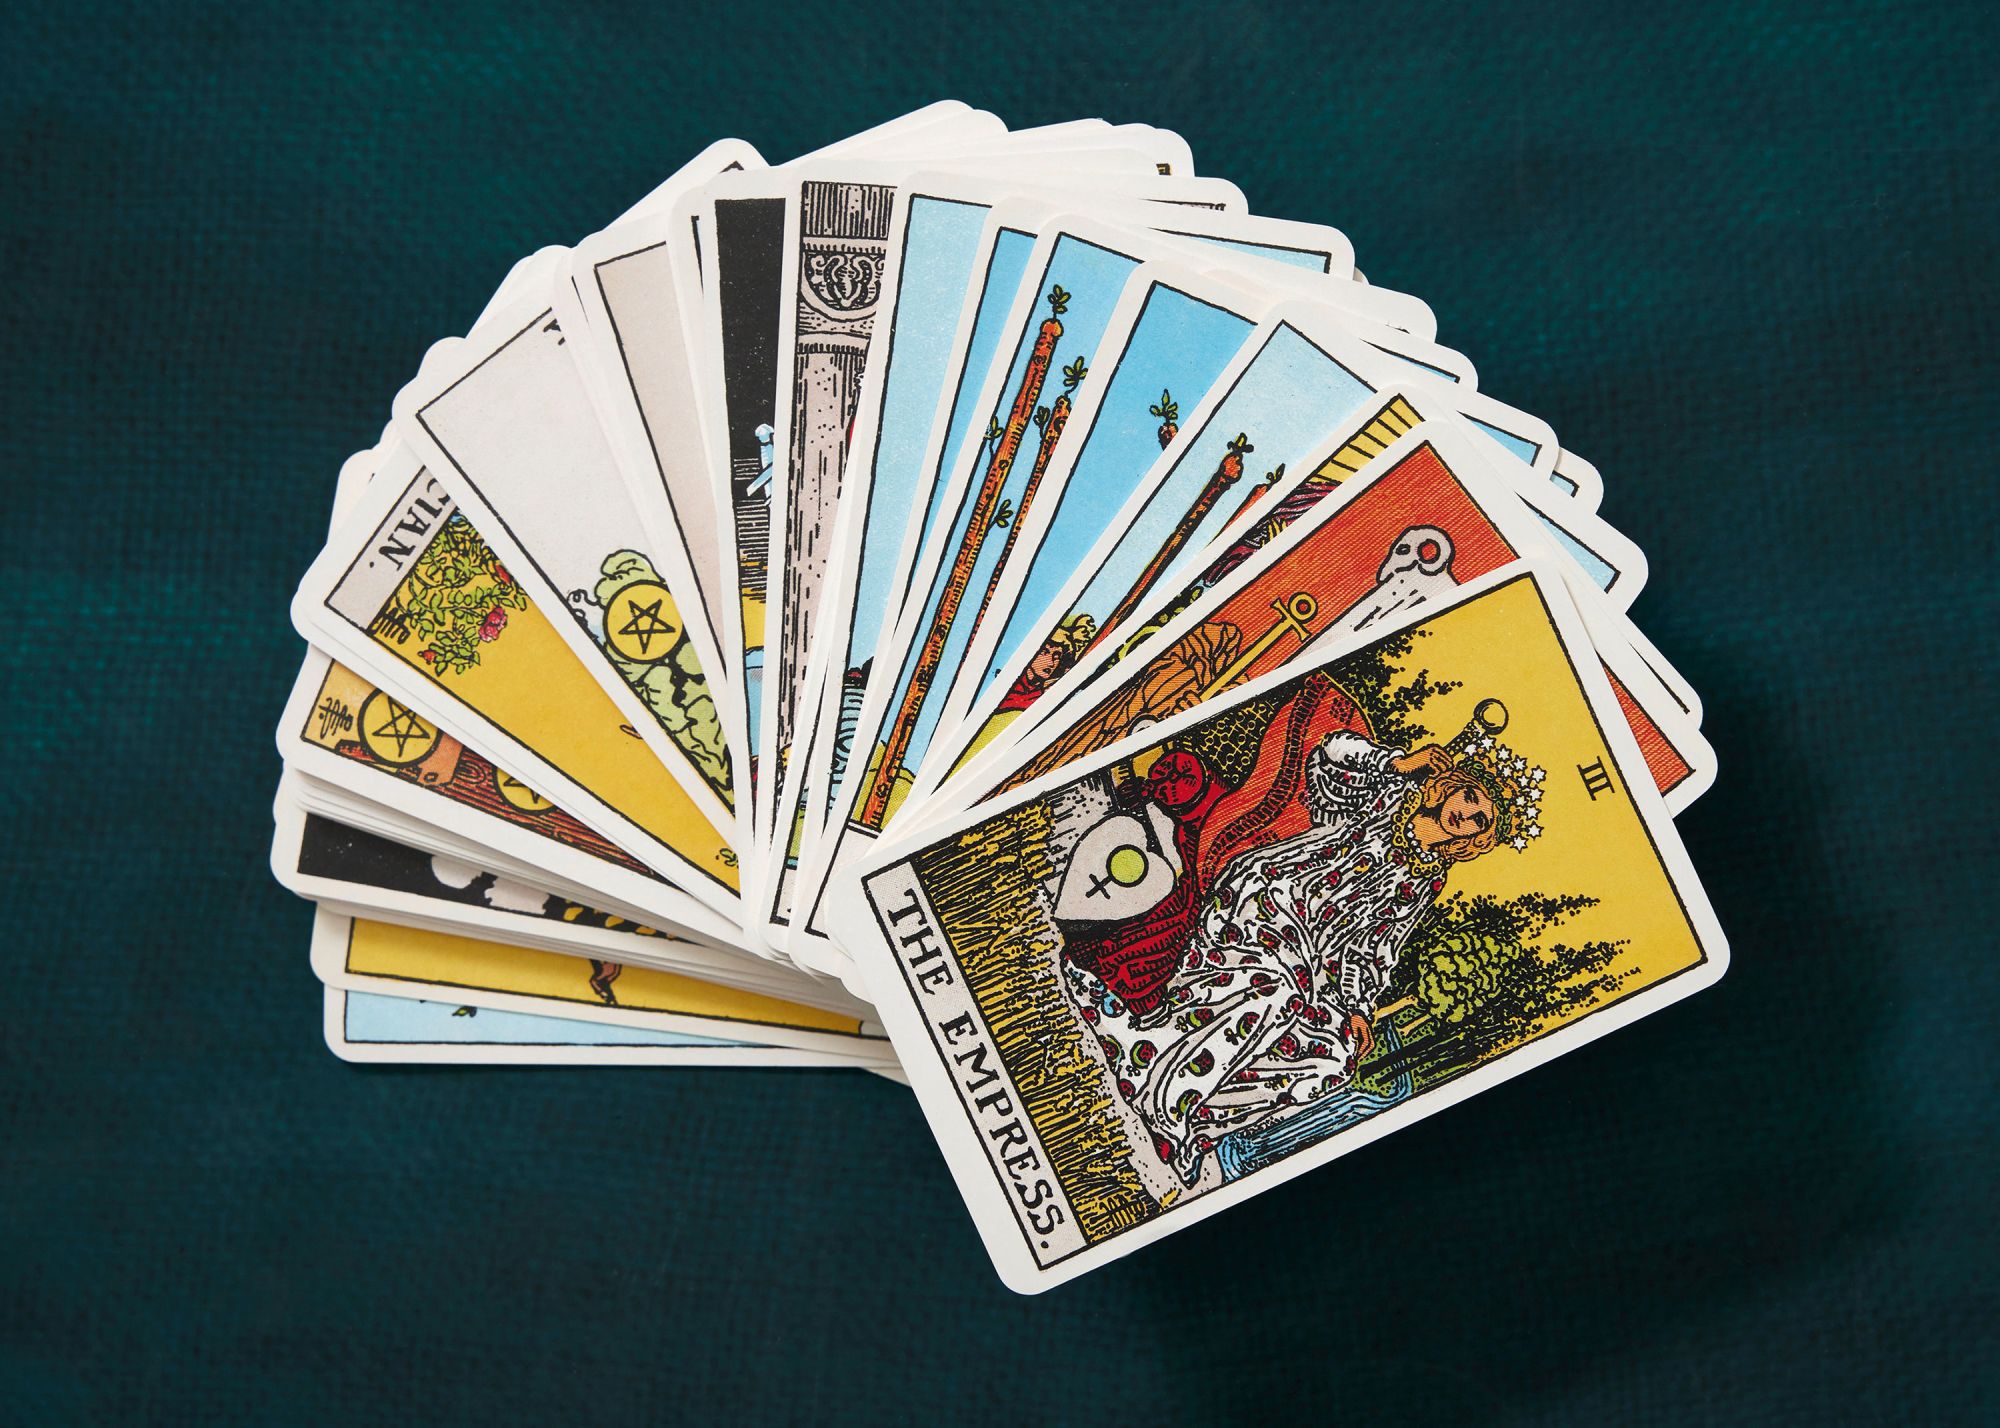 Tarot Card Pack: Buy Tarot Card Pack by unknown at Low Price in India